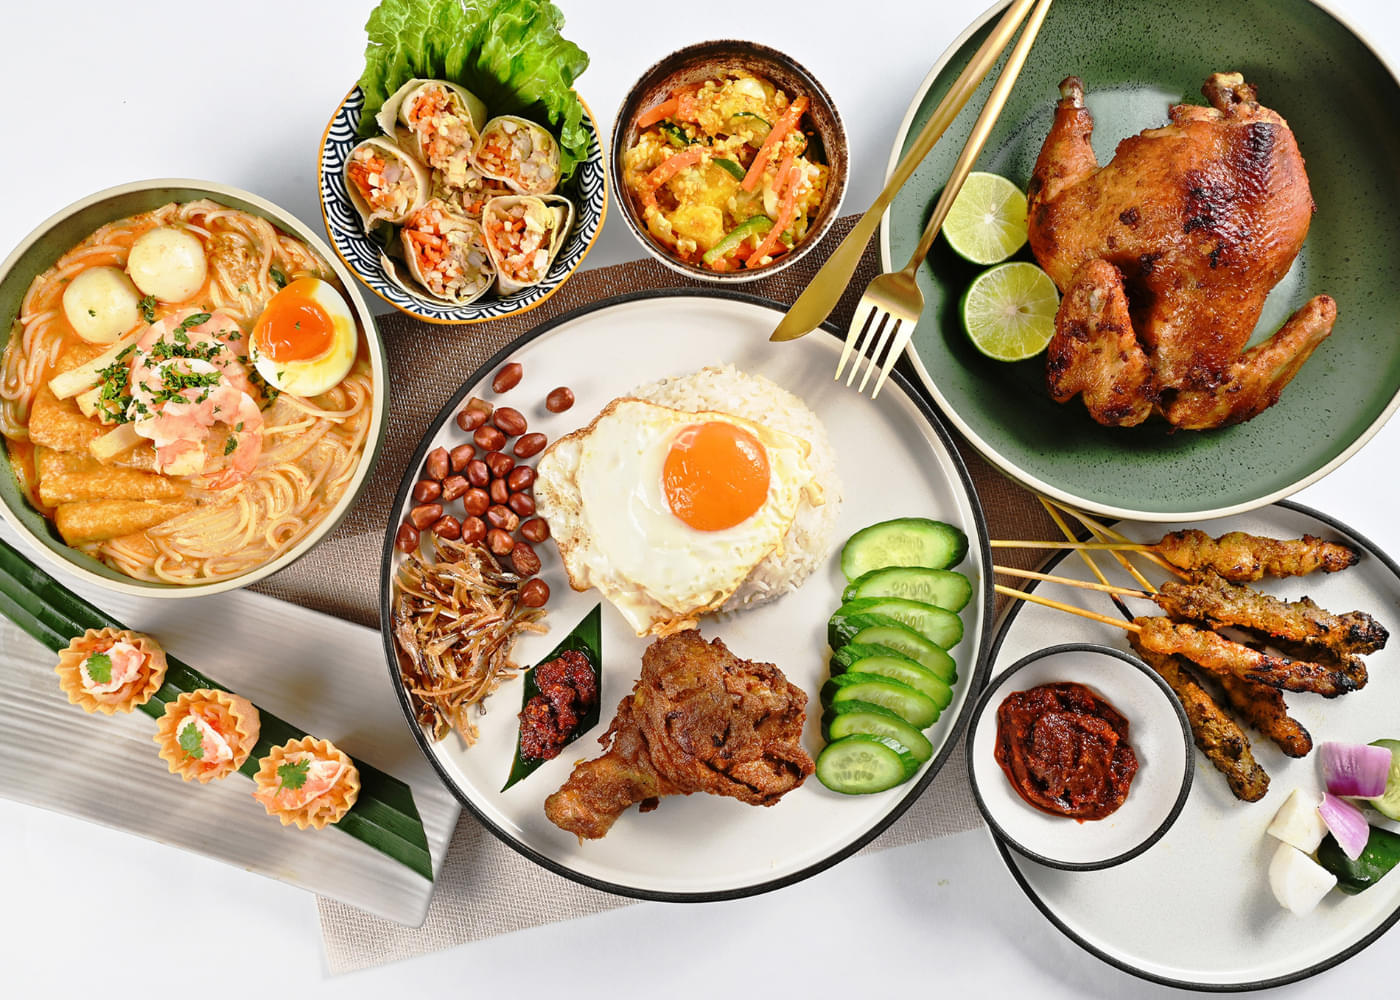 Flavourful Singaporean meal will be served in this experience